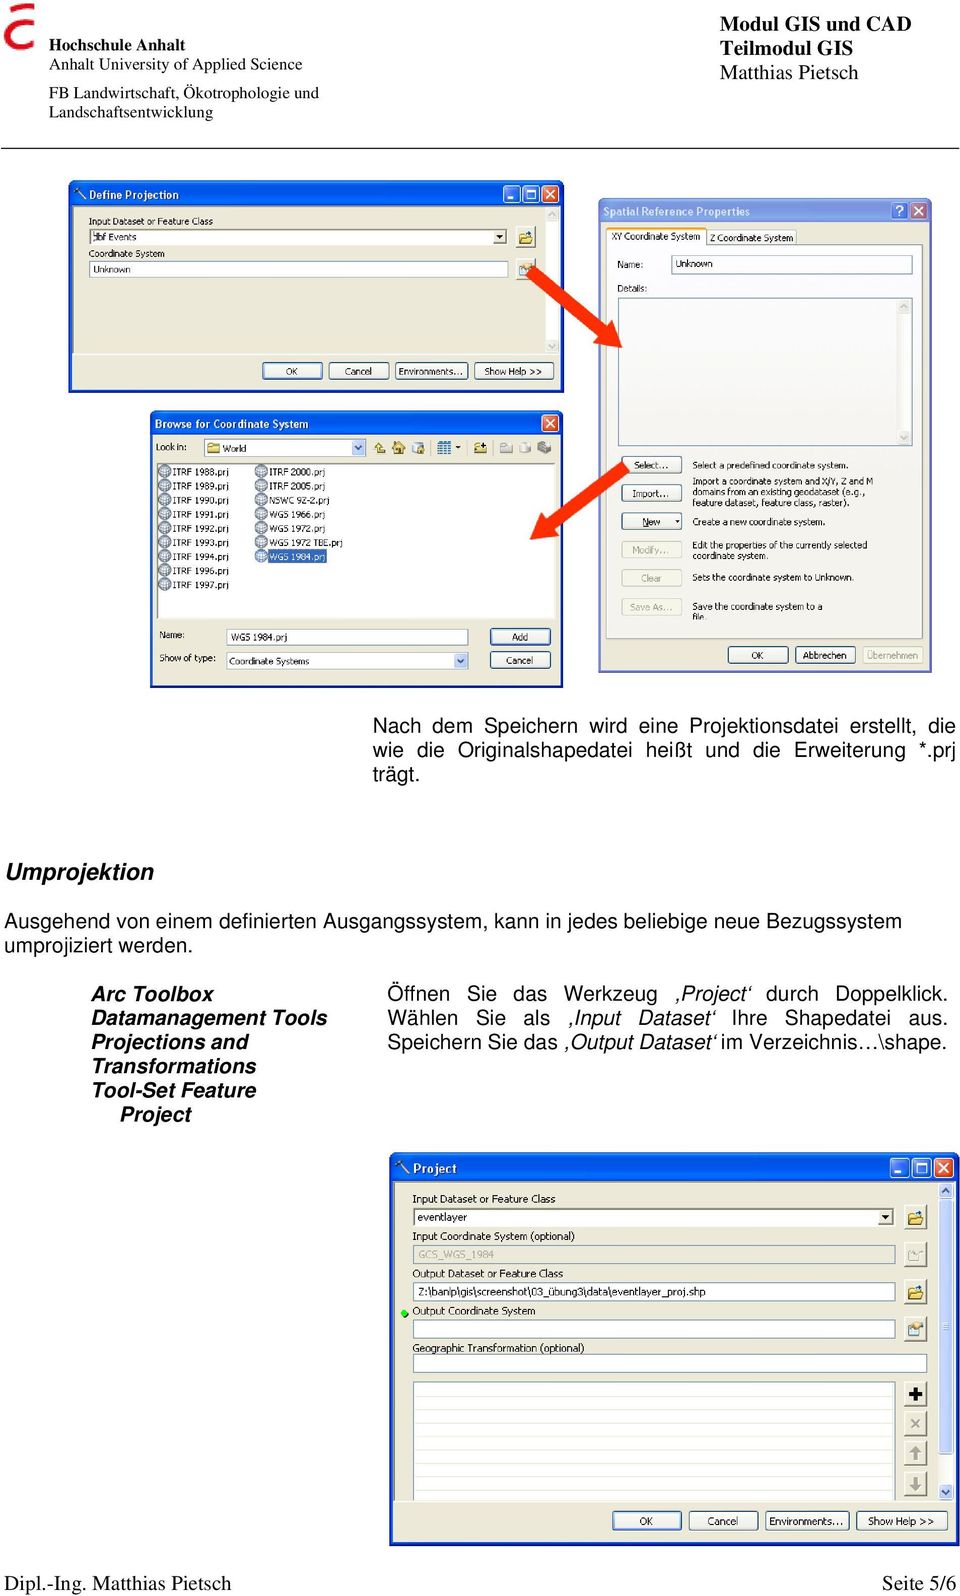 Arc Toolbox Datamanagement Tools Projections and Transformations Tool-Set Feature Project Öffnen Sie das Werkzeug,Project durch